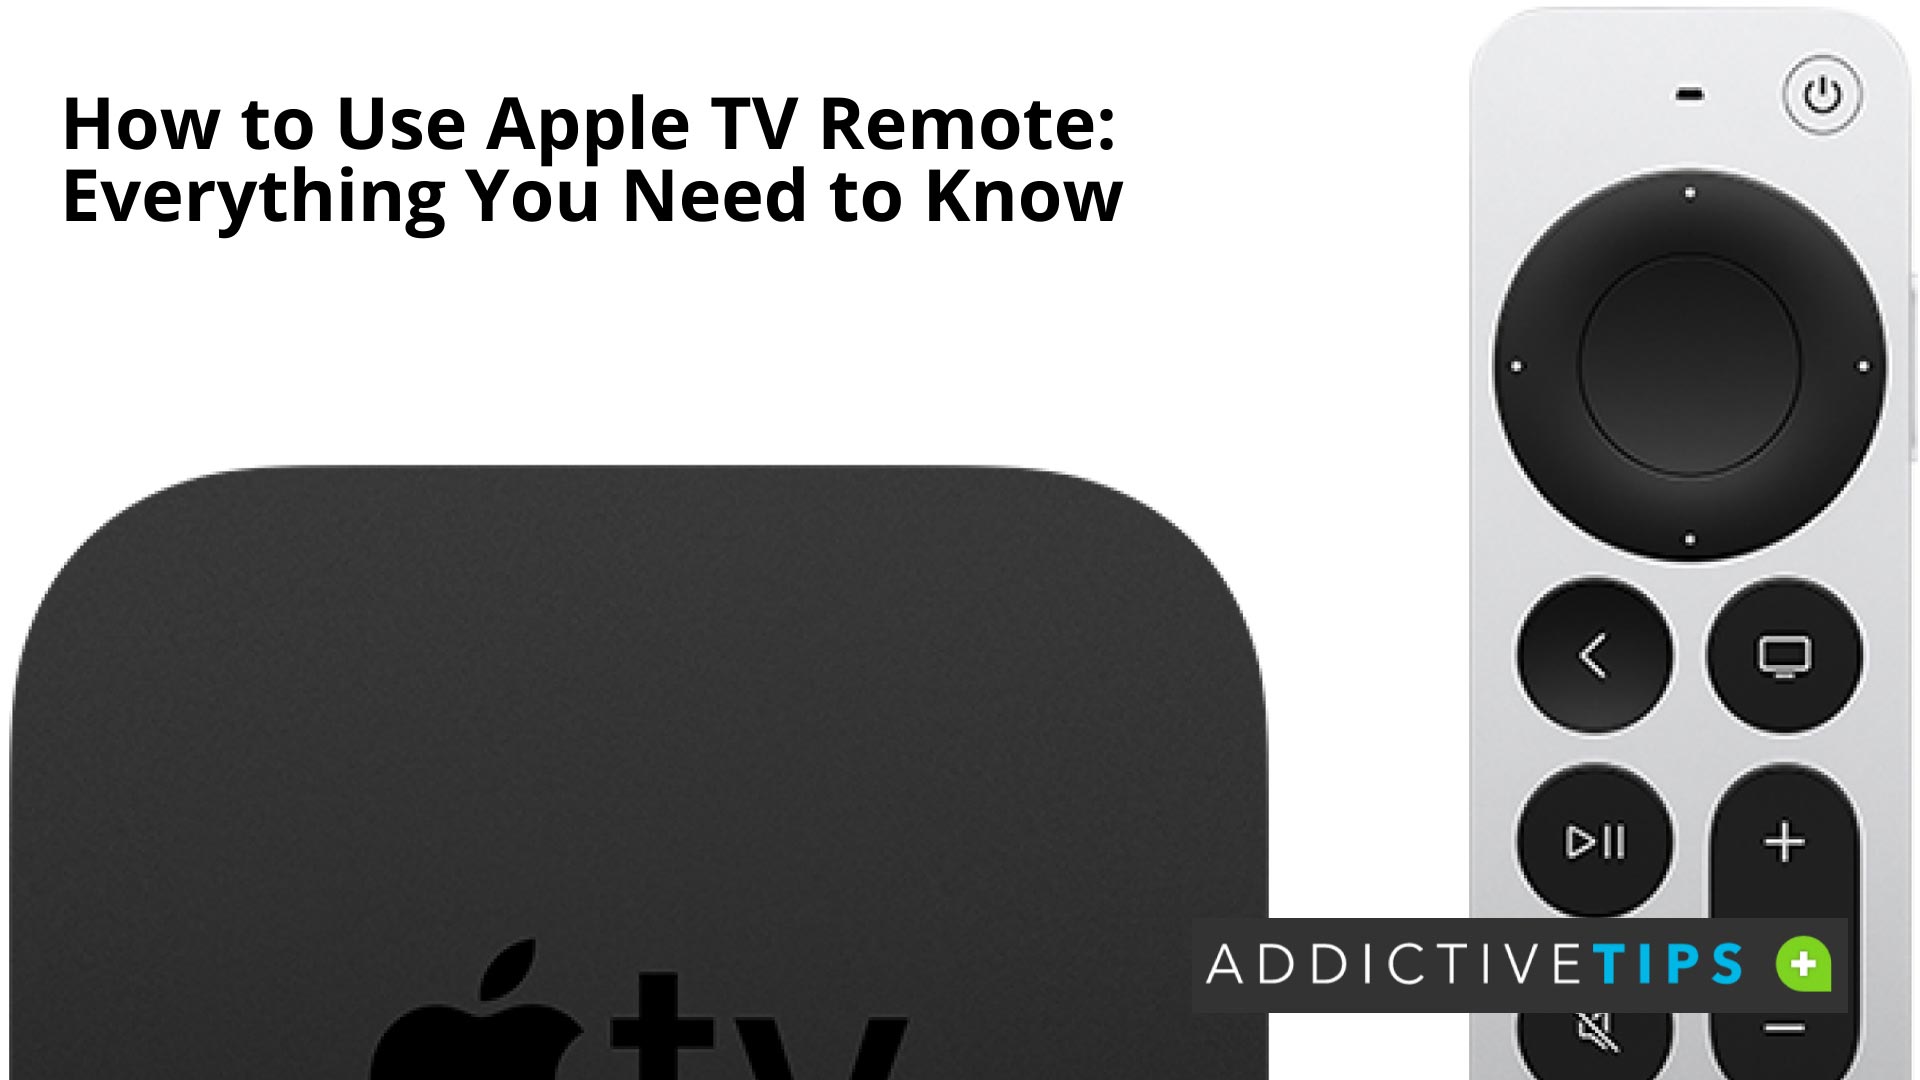 How to Use Apple TV Remote - AddictiveTips 2022